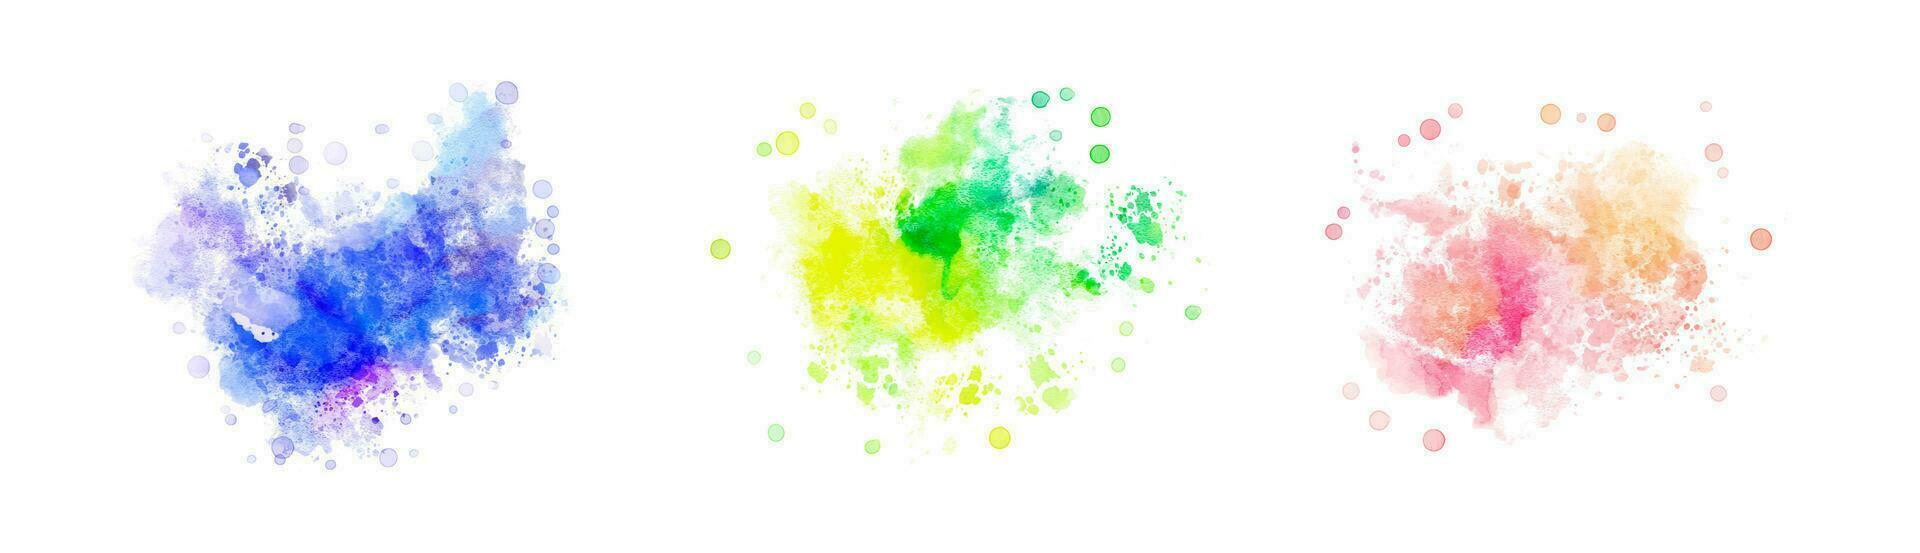 watercolor vector stains. background for title and logo